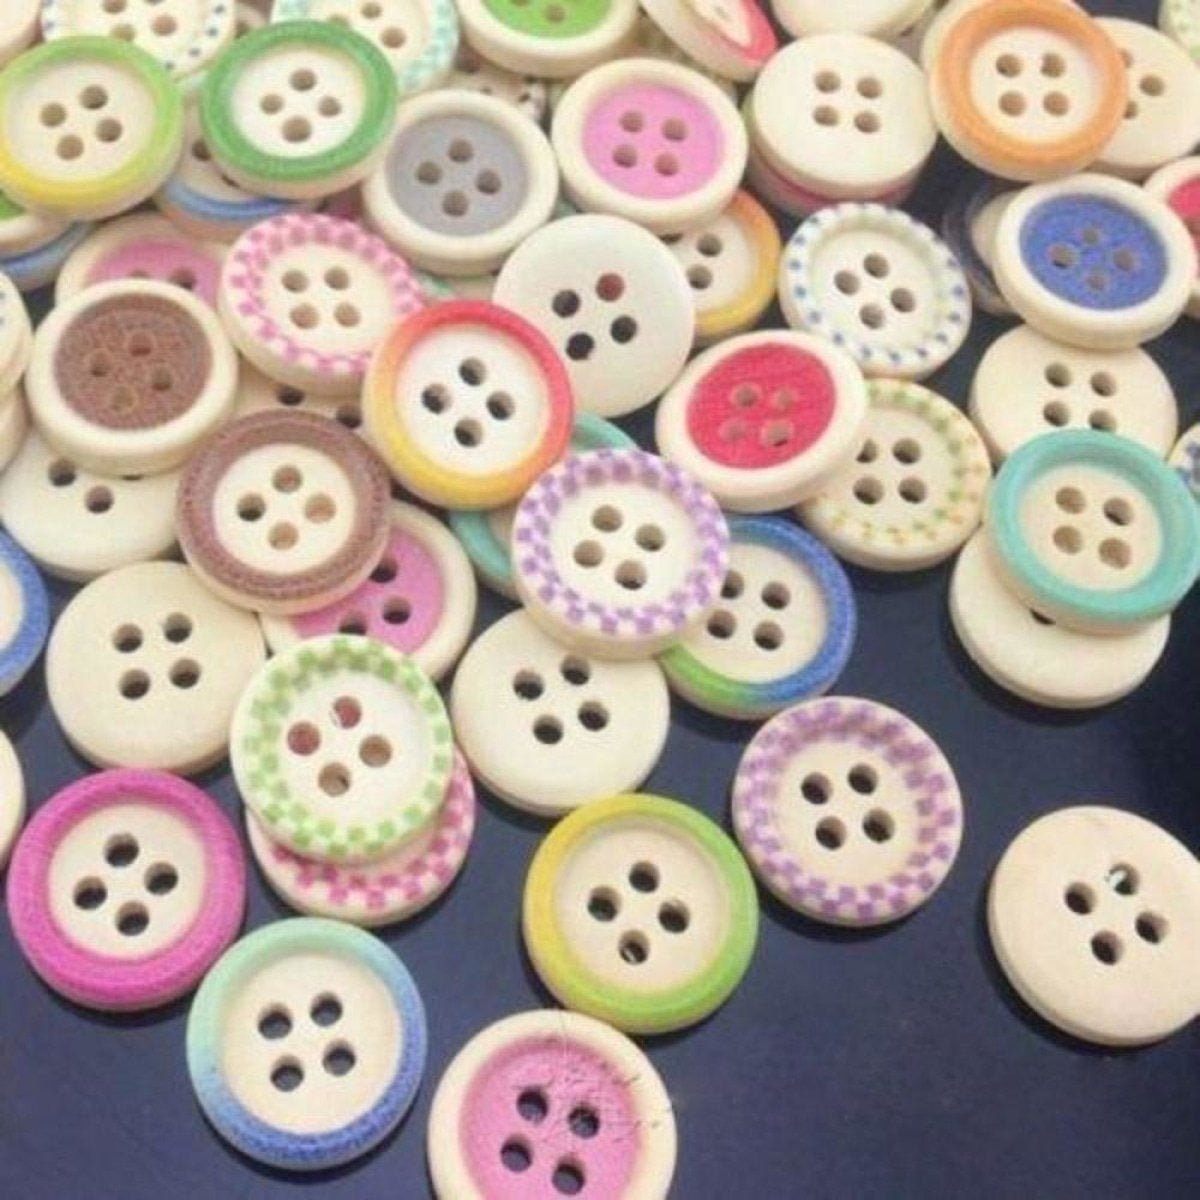 100pcs Mixed Wooden Buttons Flower for Clothing Craft Sewing DIY 2 Hole 15mm - Colourful - - Asia Sell